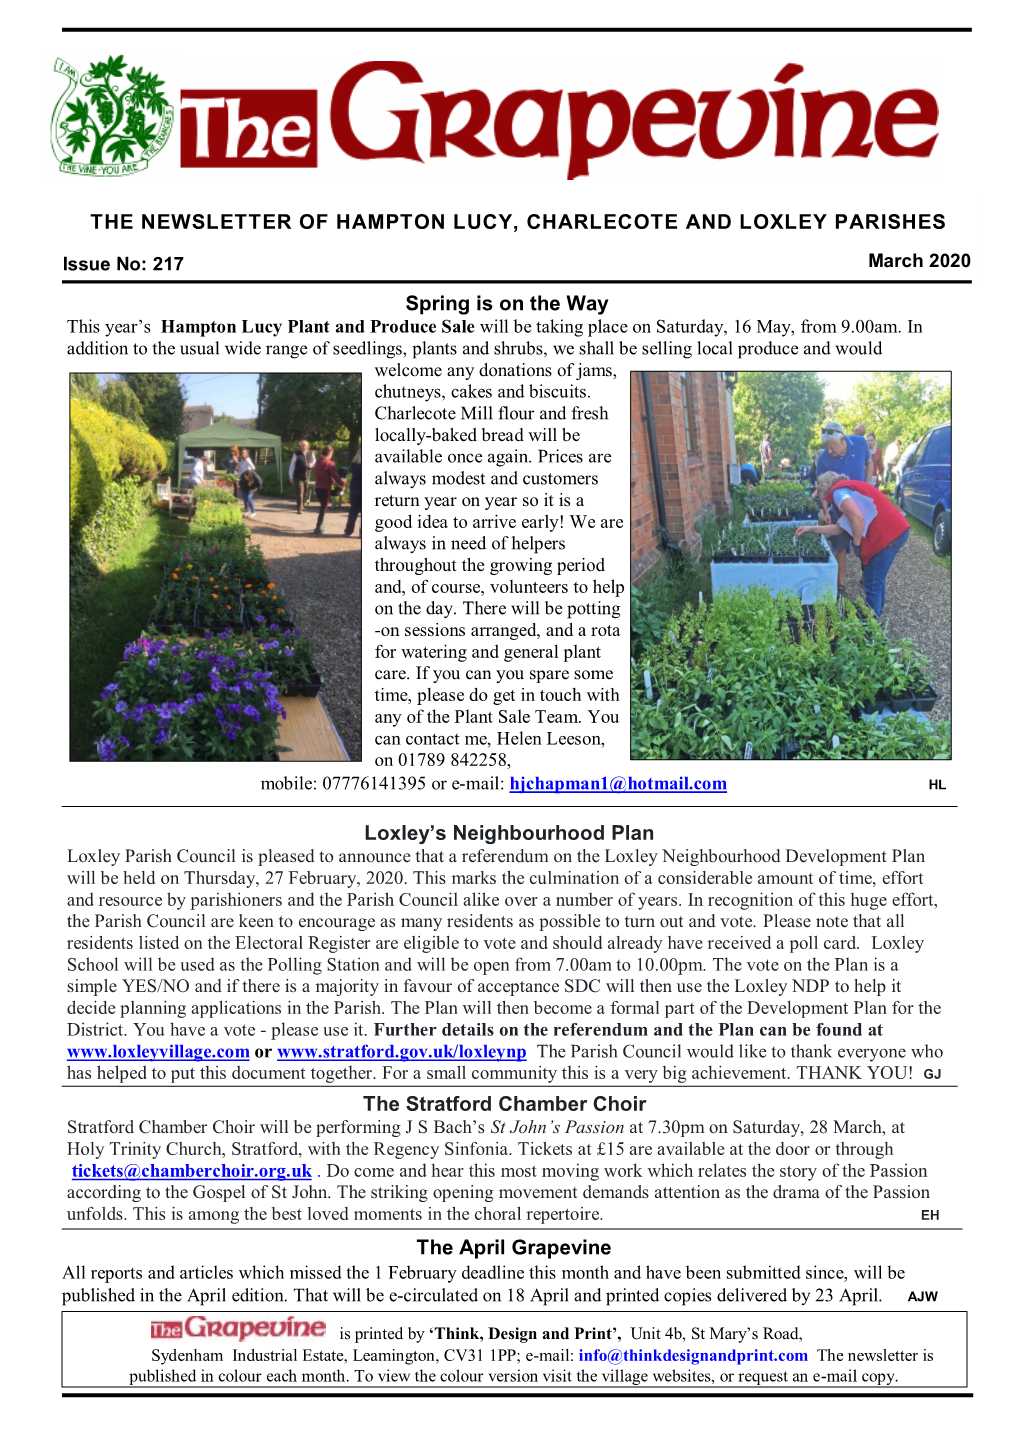 THE NEWSLETTER of HAMPTON LUCY, CHARLECOTE and LOXLEY PARISHES Spring Is on the Way Loxley's Neighbourhood Plan the Stratford